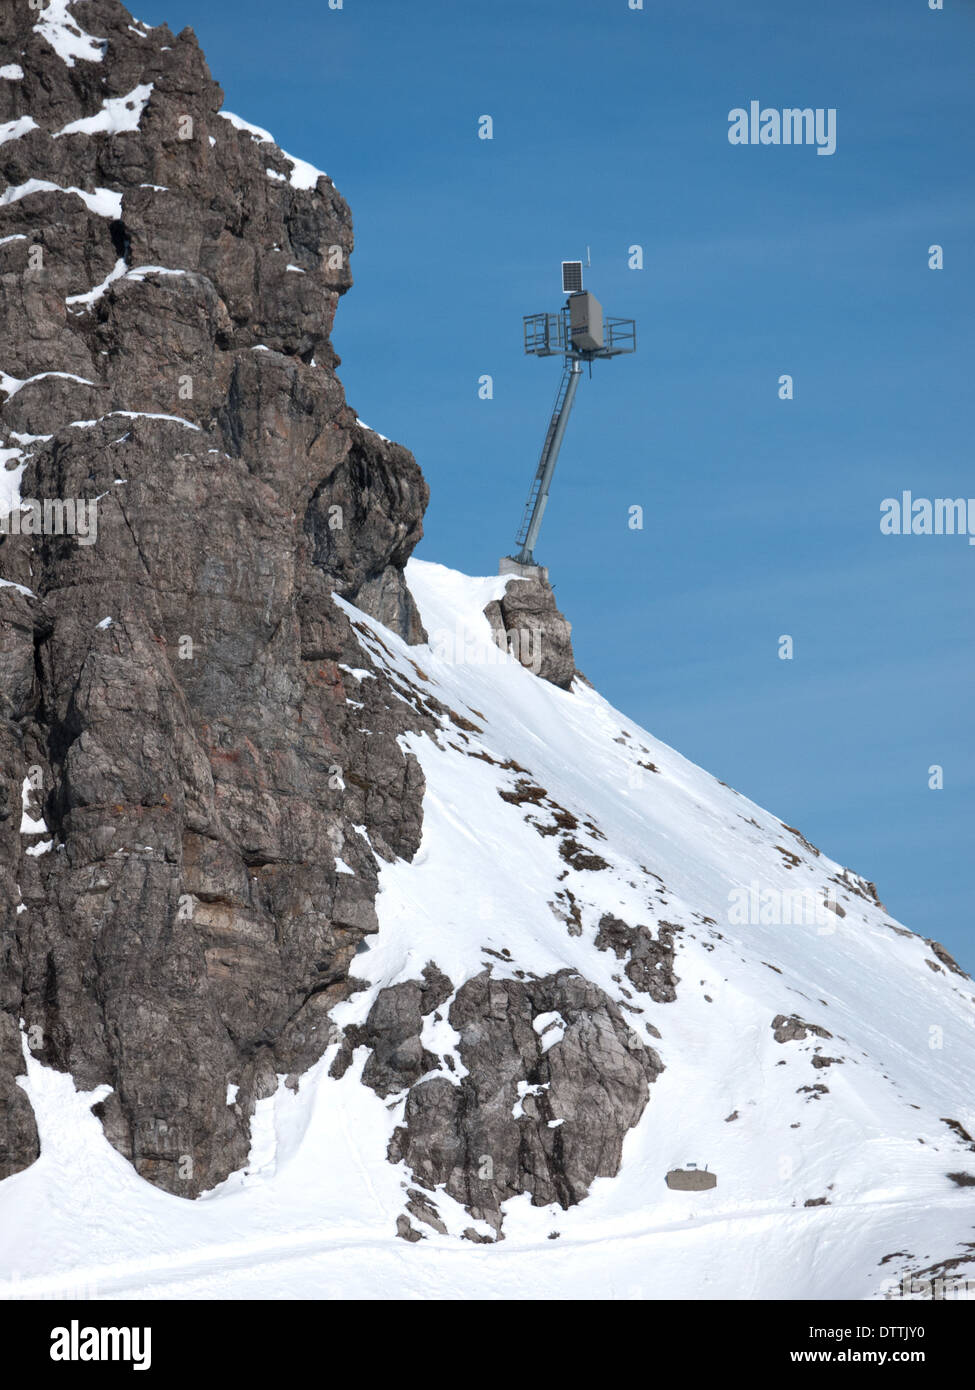 Machine for detonating avalanches in inaccessable places on the ski slopes to protect skiers passing below in Lech Austria. Stock Photo